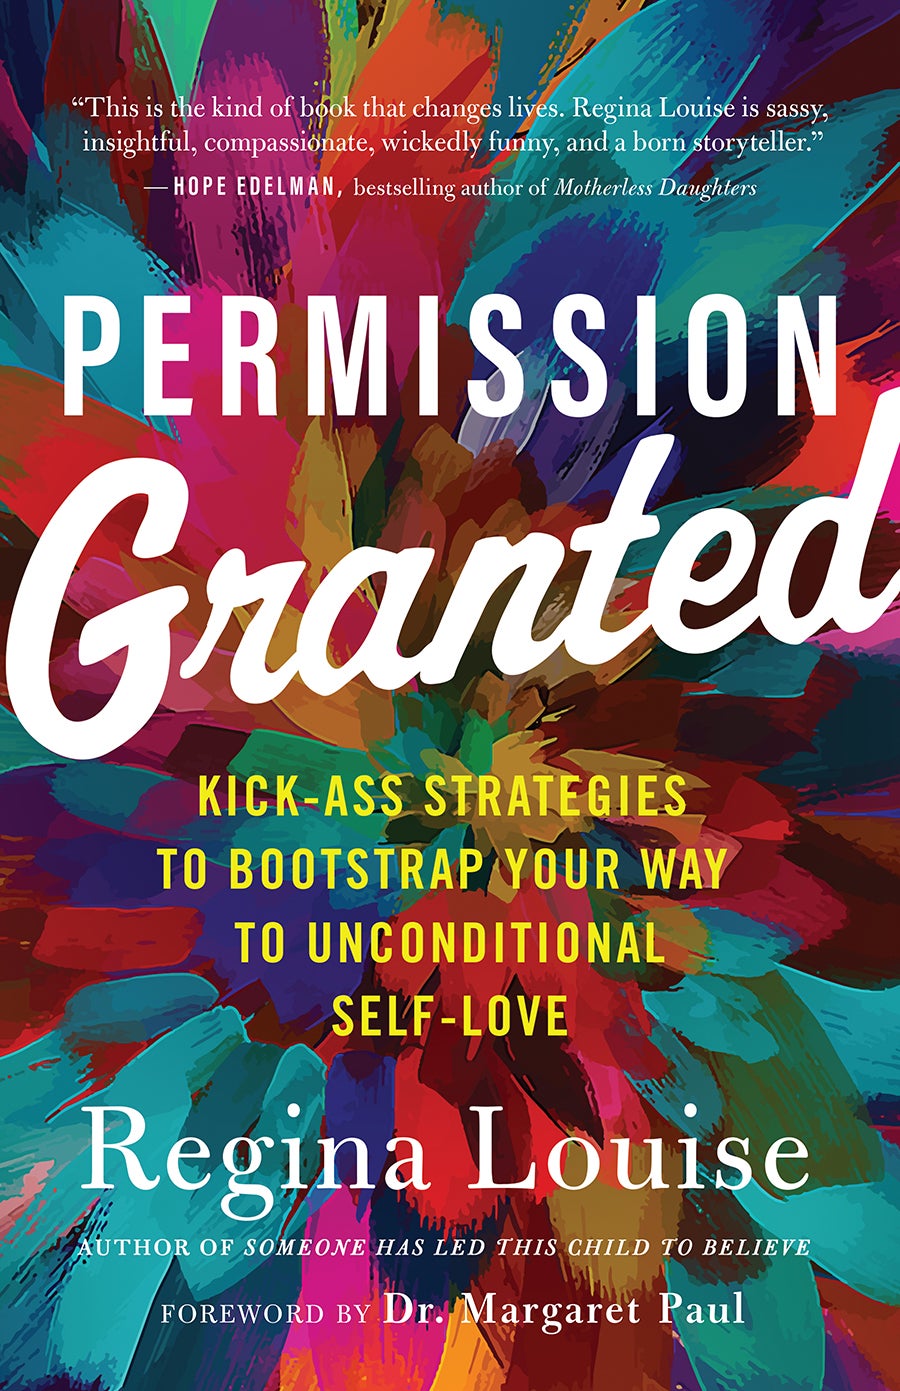 Regina Louise’s New Book Reminds Black Women We Have Permission To Take Control Of Our Lives